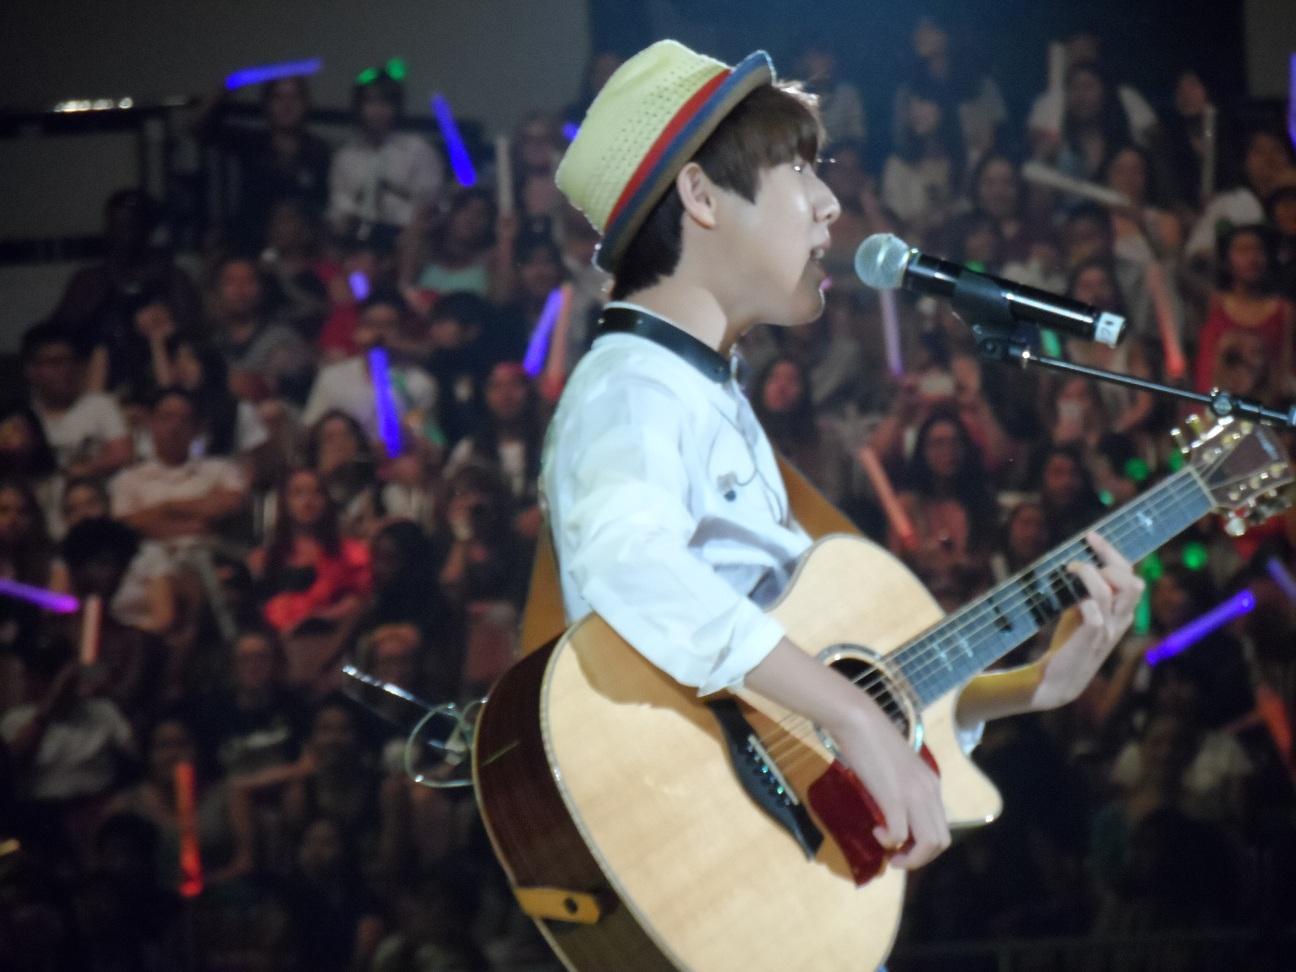 Yoo Seung Woo performing during the concert